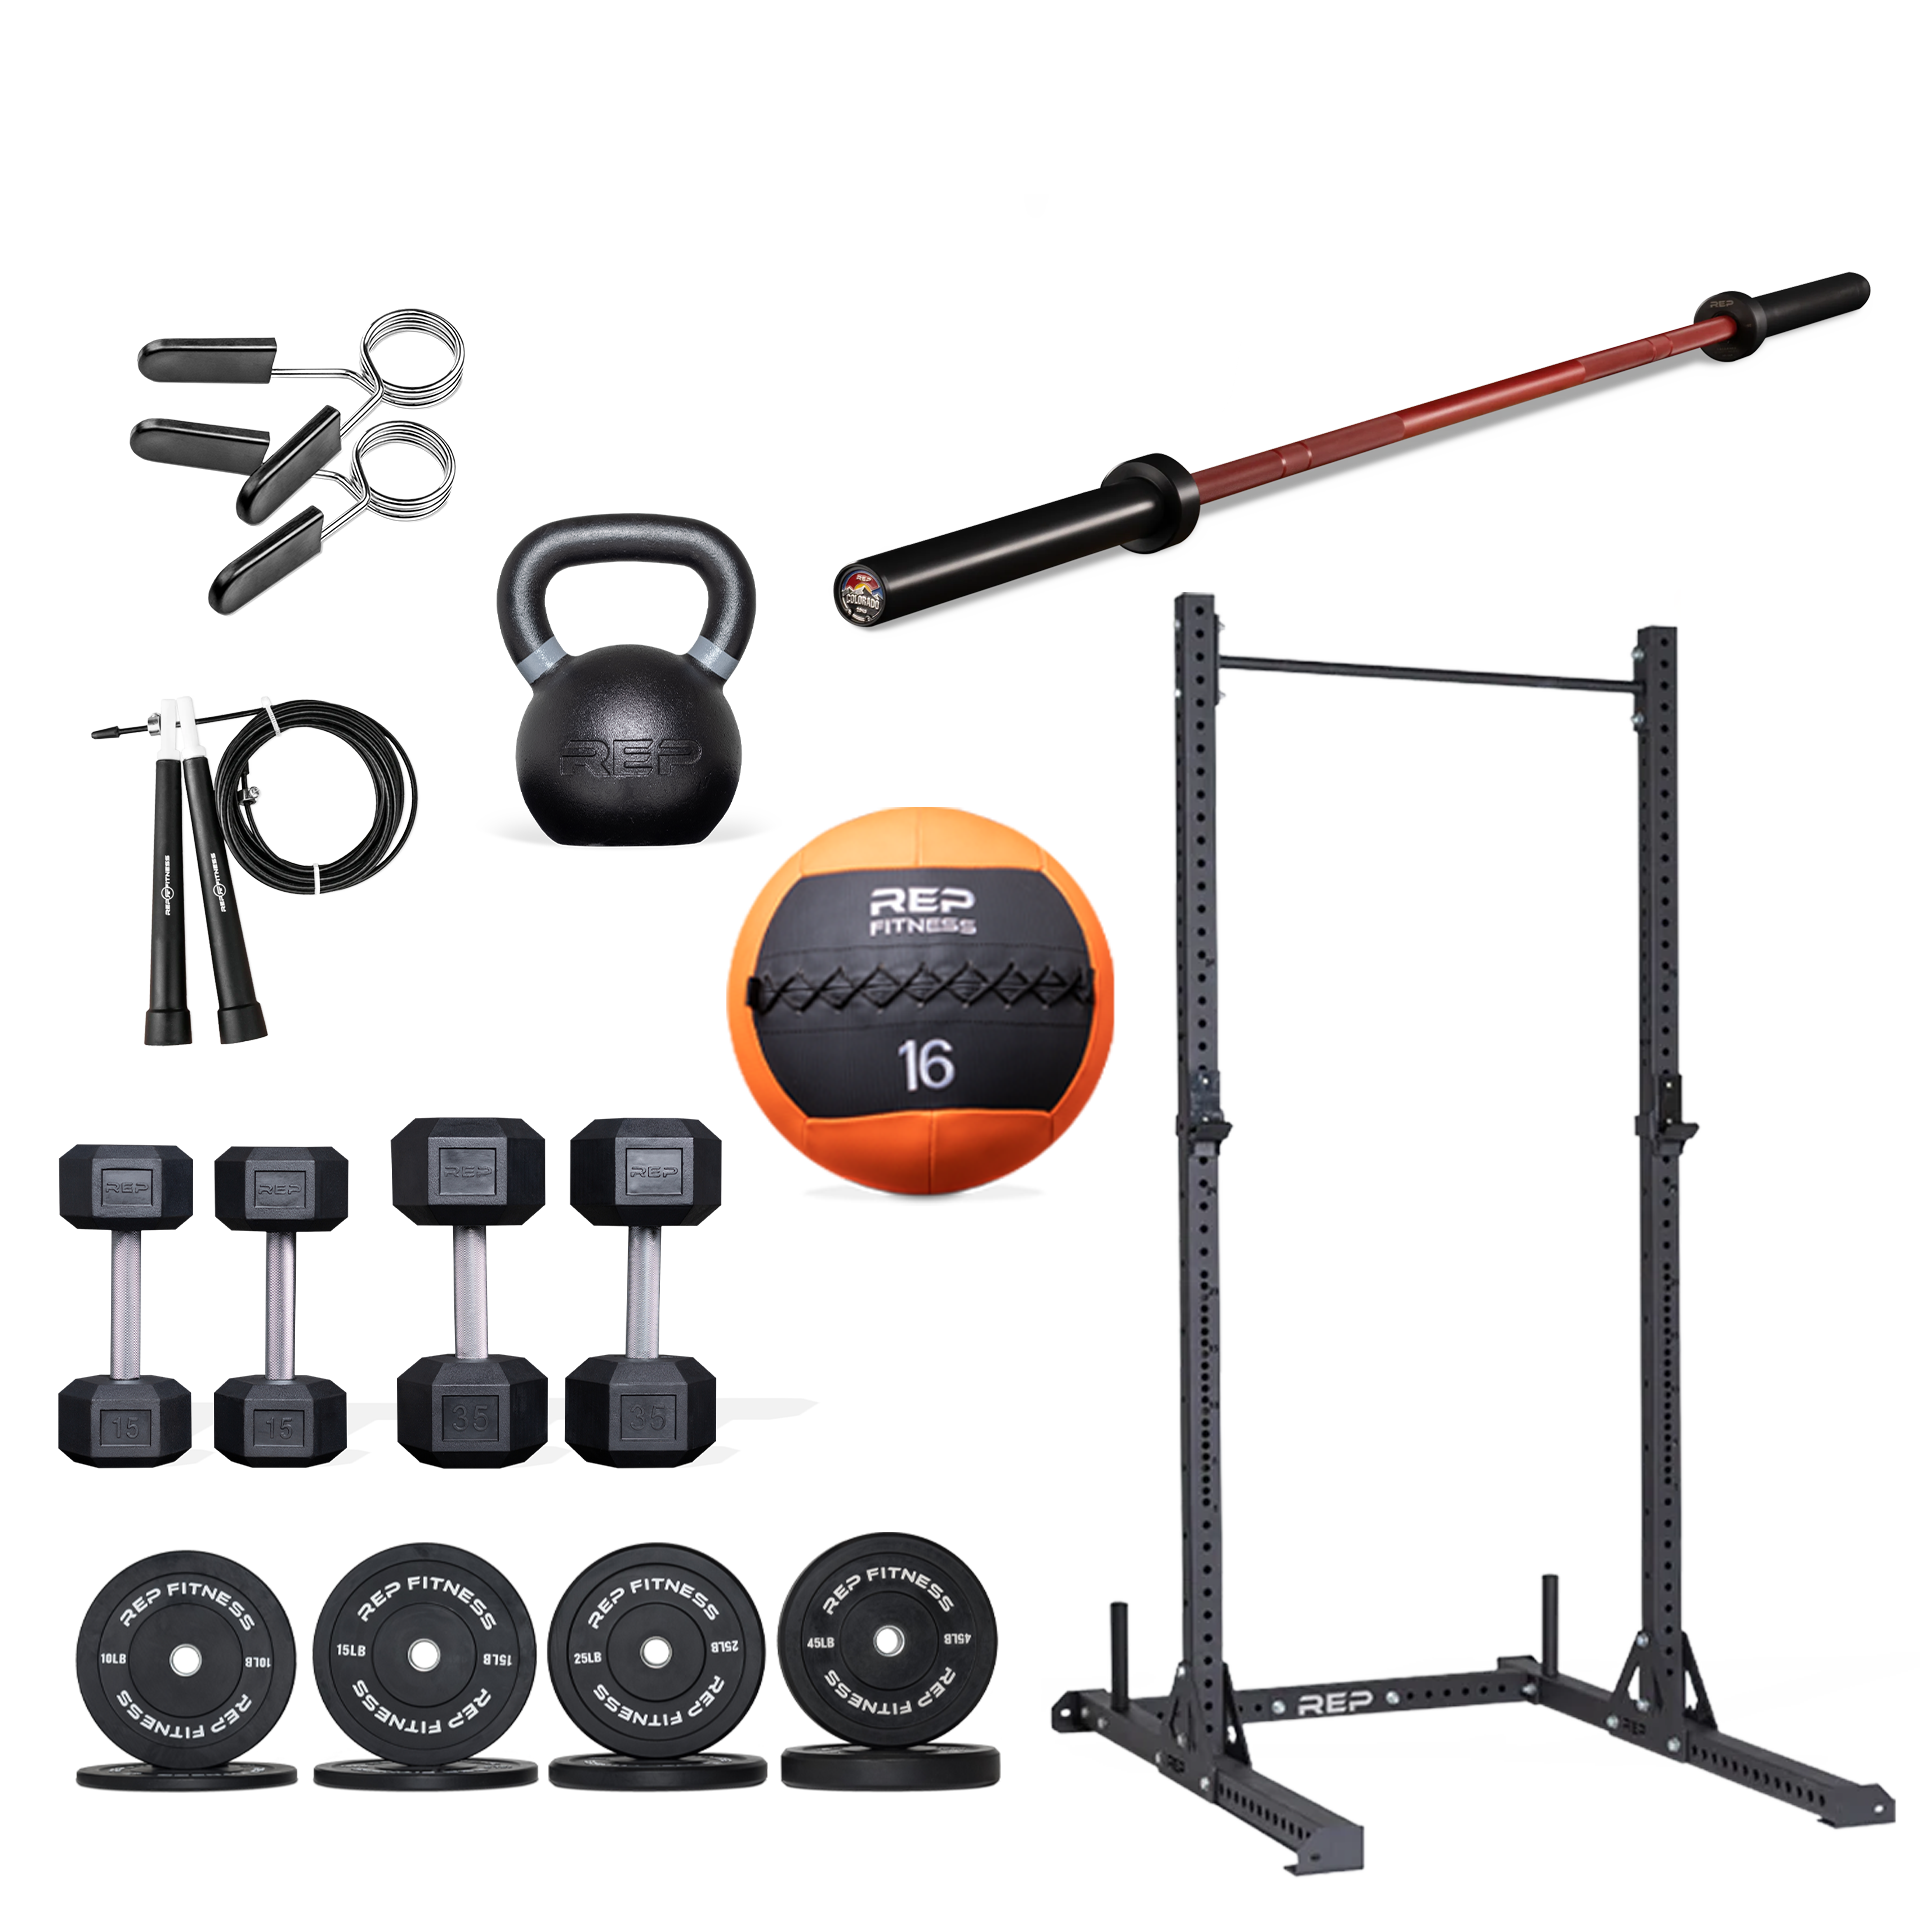 Functional Fitness Package